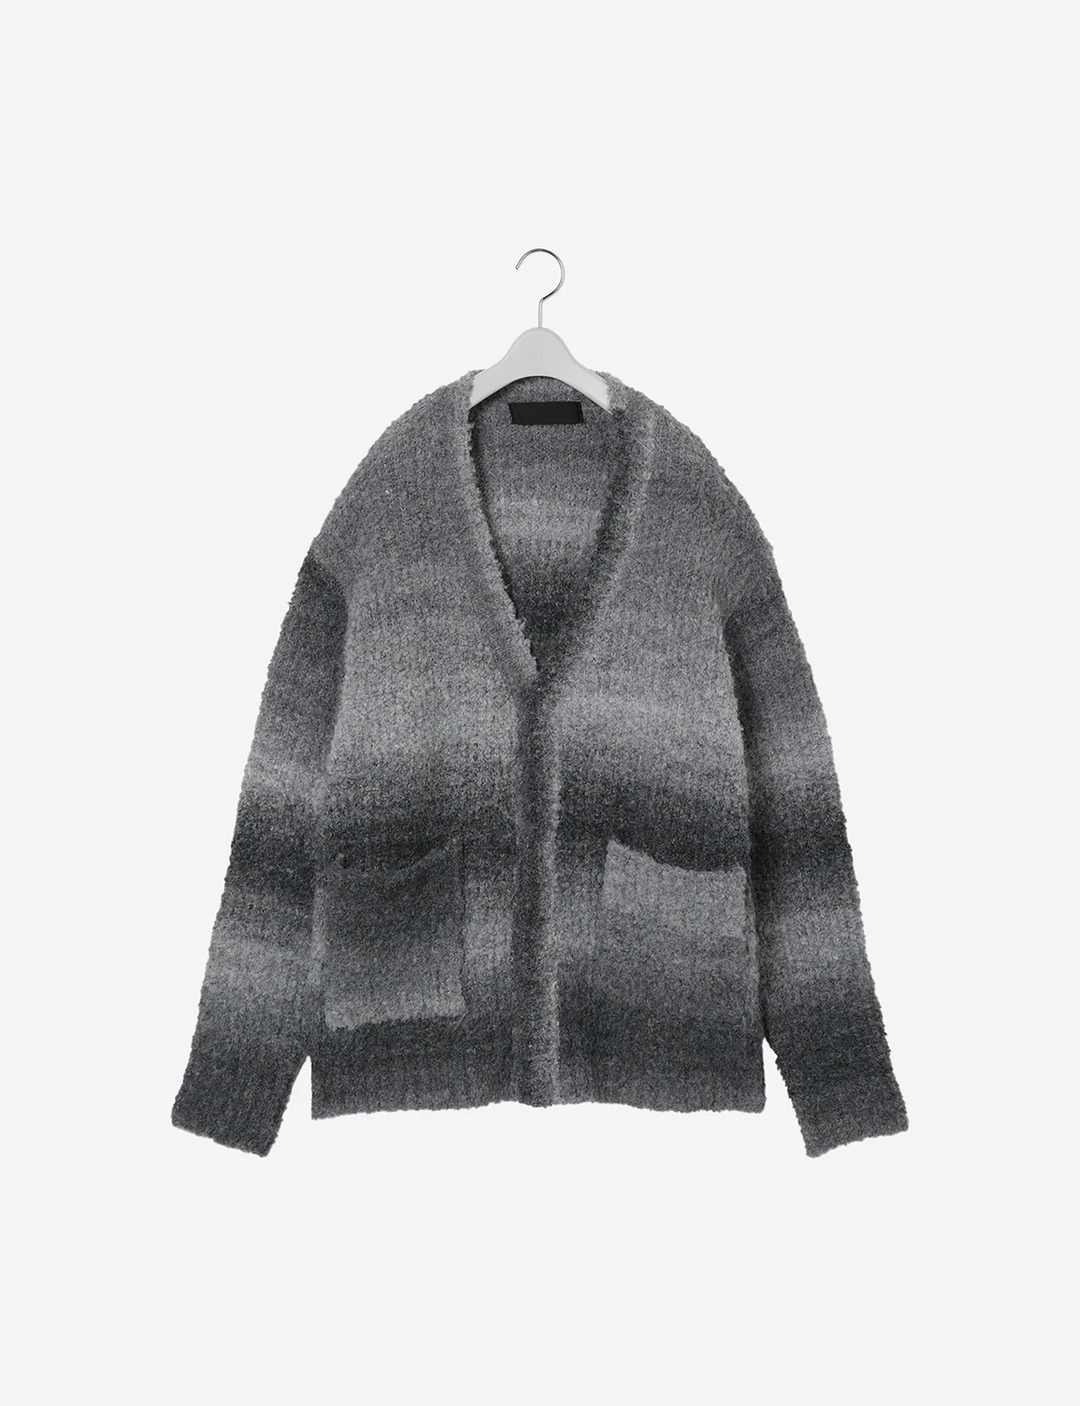 th products - Inflated Cardigan / mono – The Contemporary Fix Kyoto